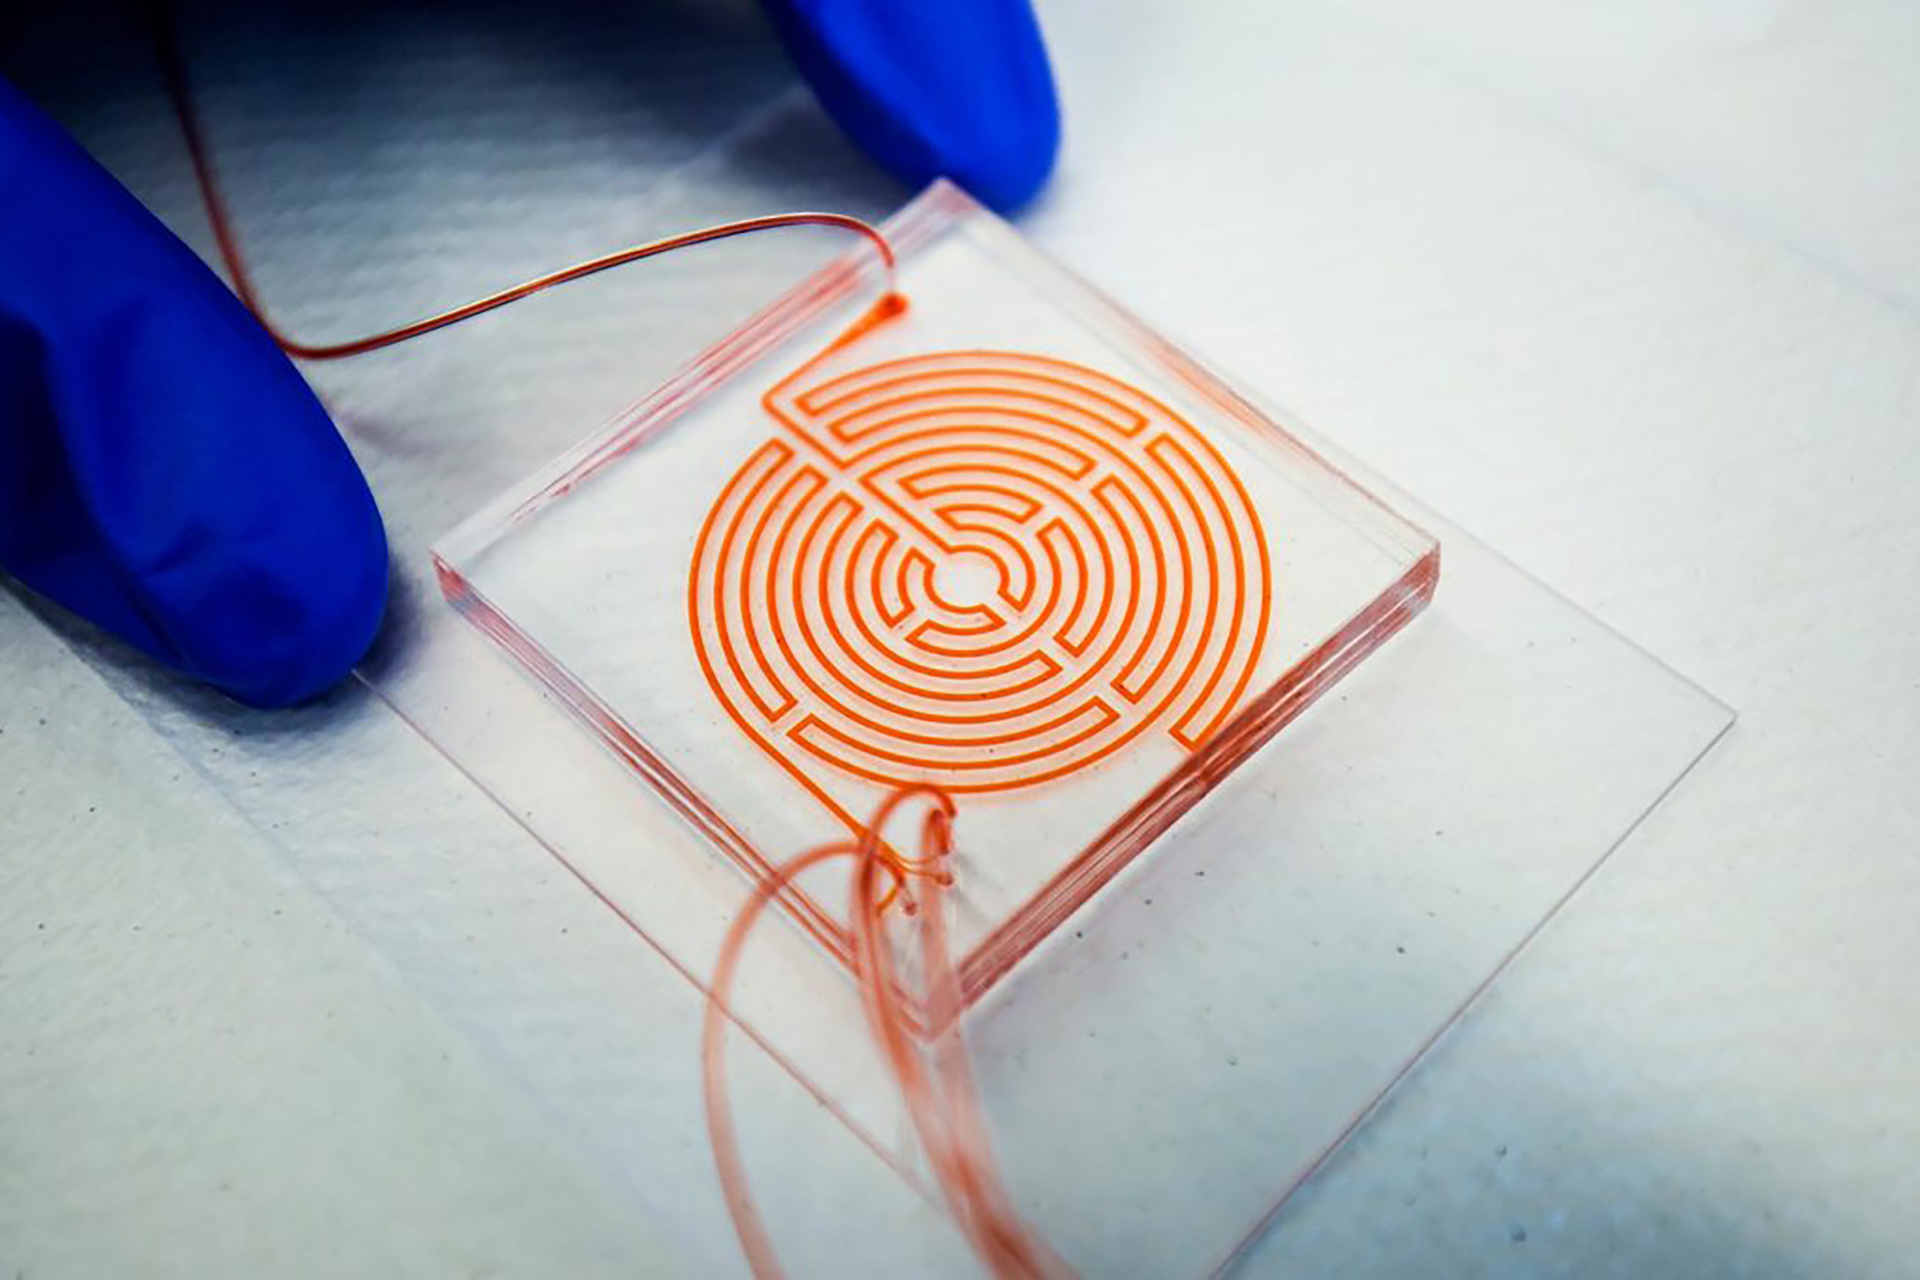 Labyrinth chip developed by Nagrath and Wicha used in clinical trial